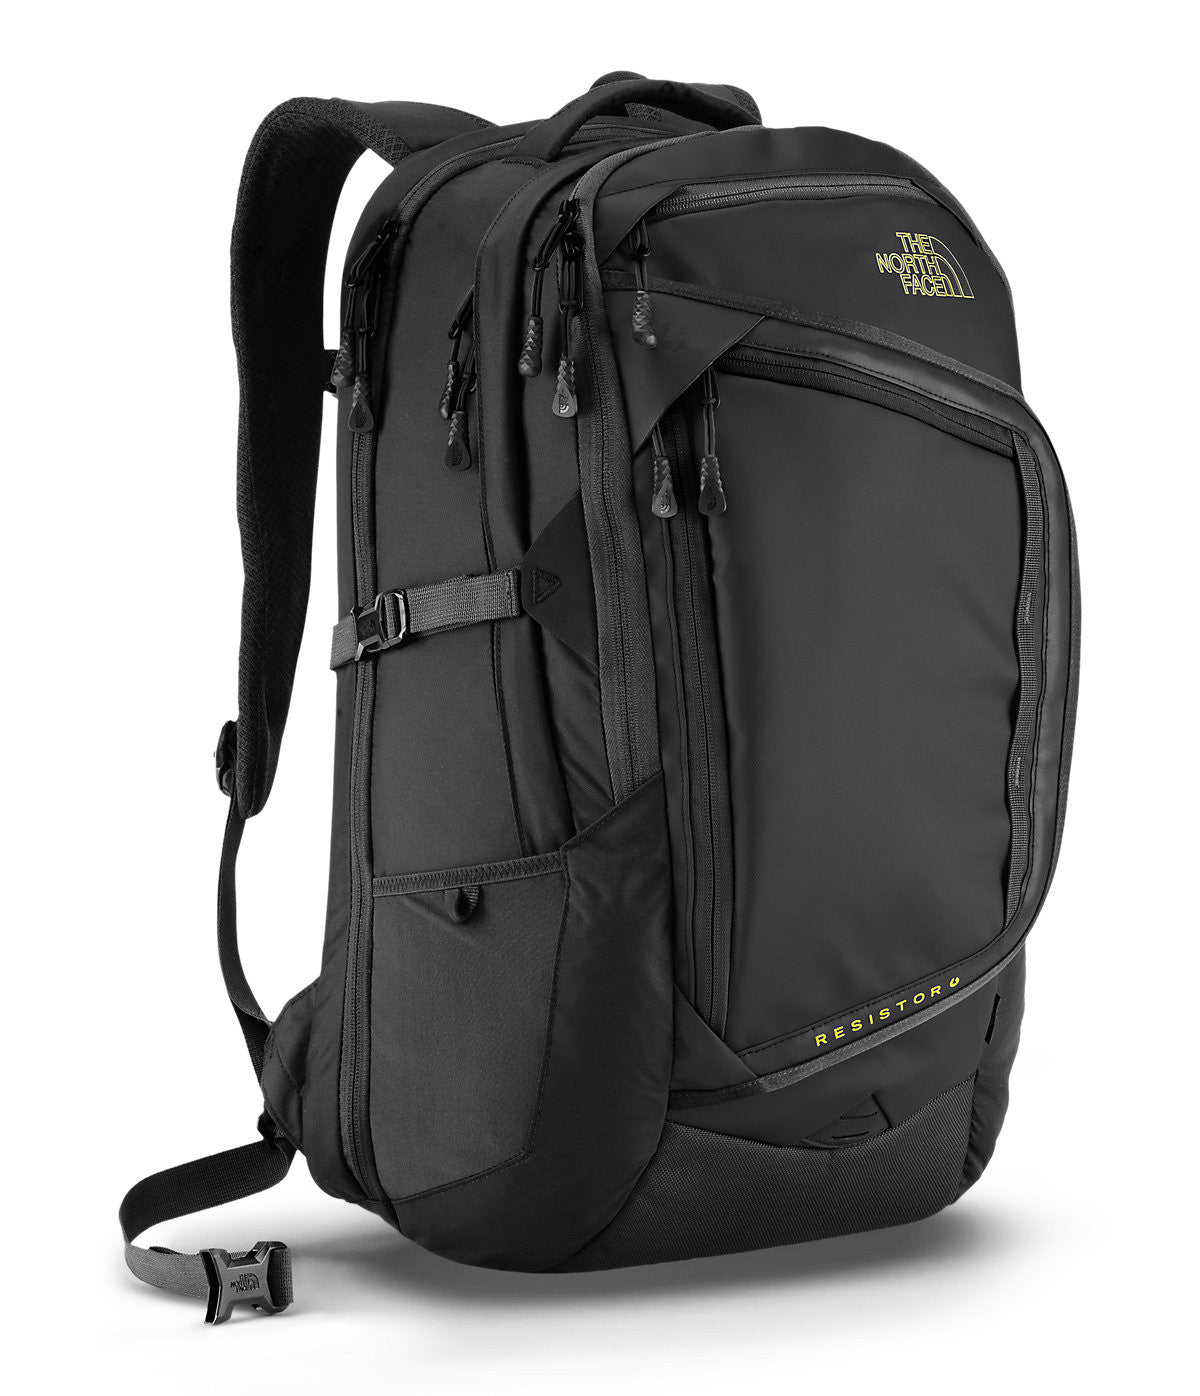 Star The North Face Connector Backpack